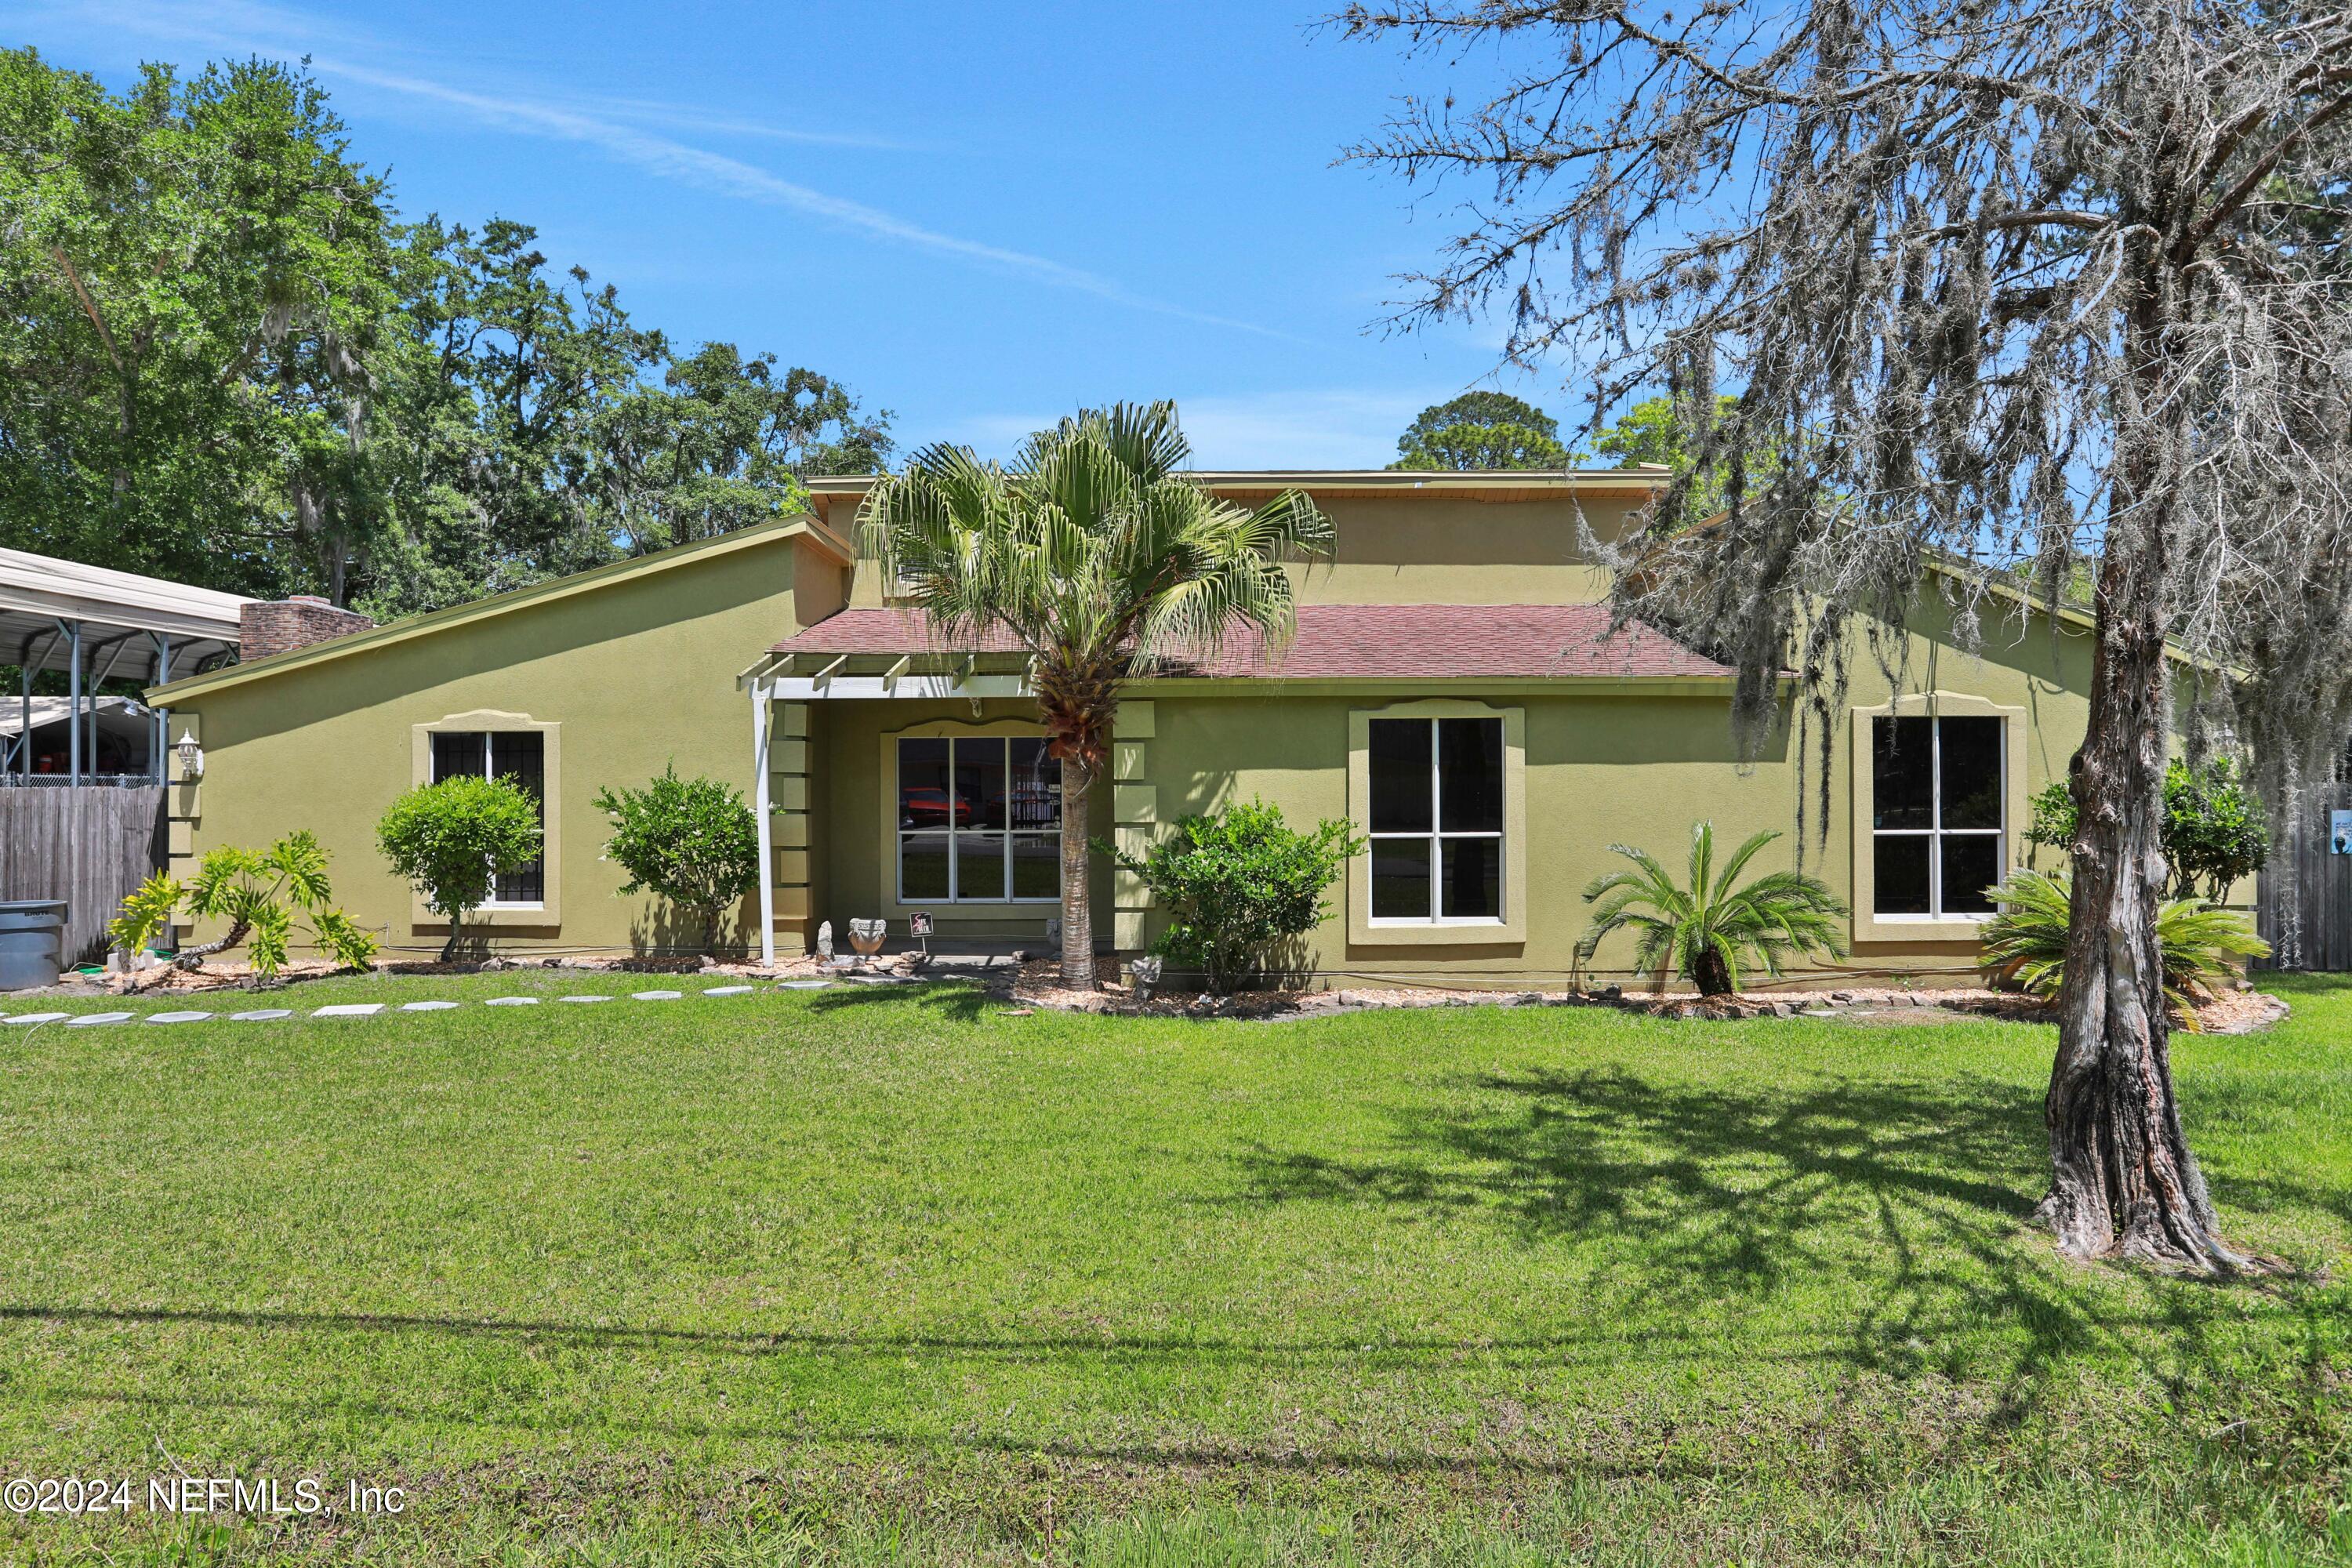 Jacksonville, FL home for sale located at 9615 Carbondale Drive W, Jacksonville, FL 32208